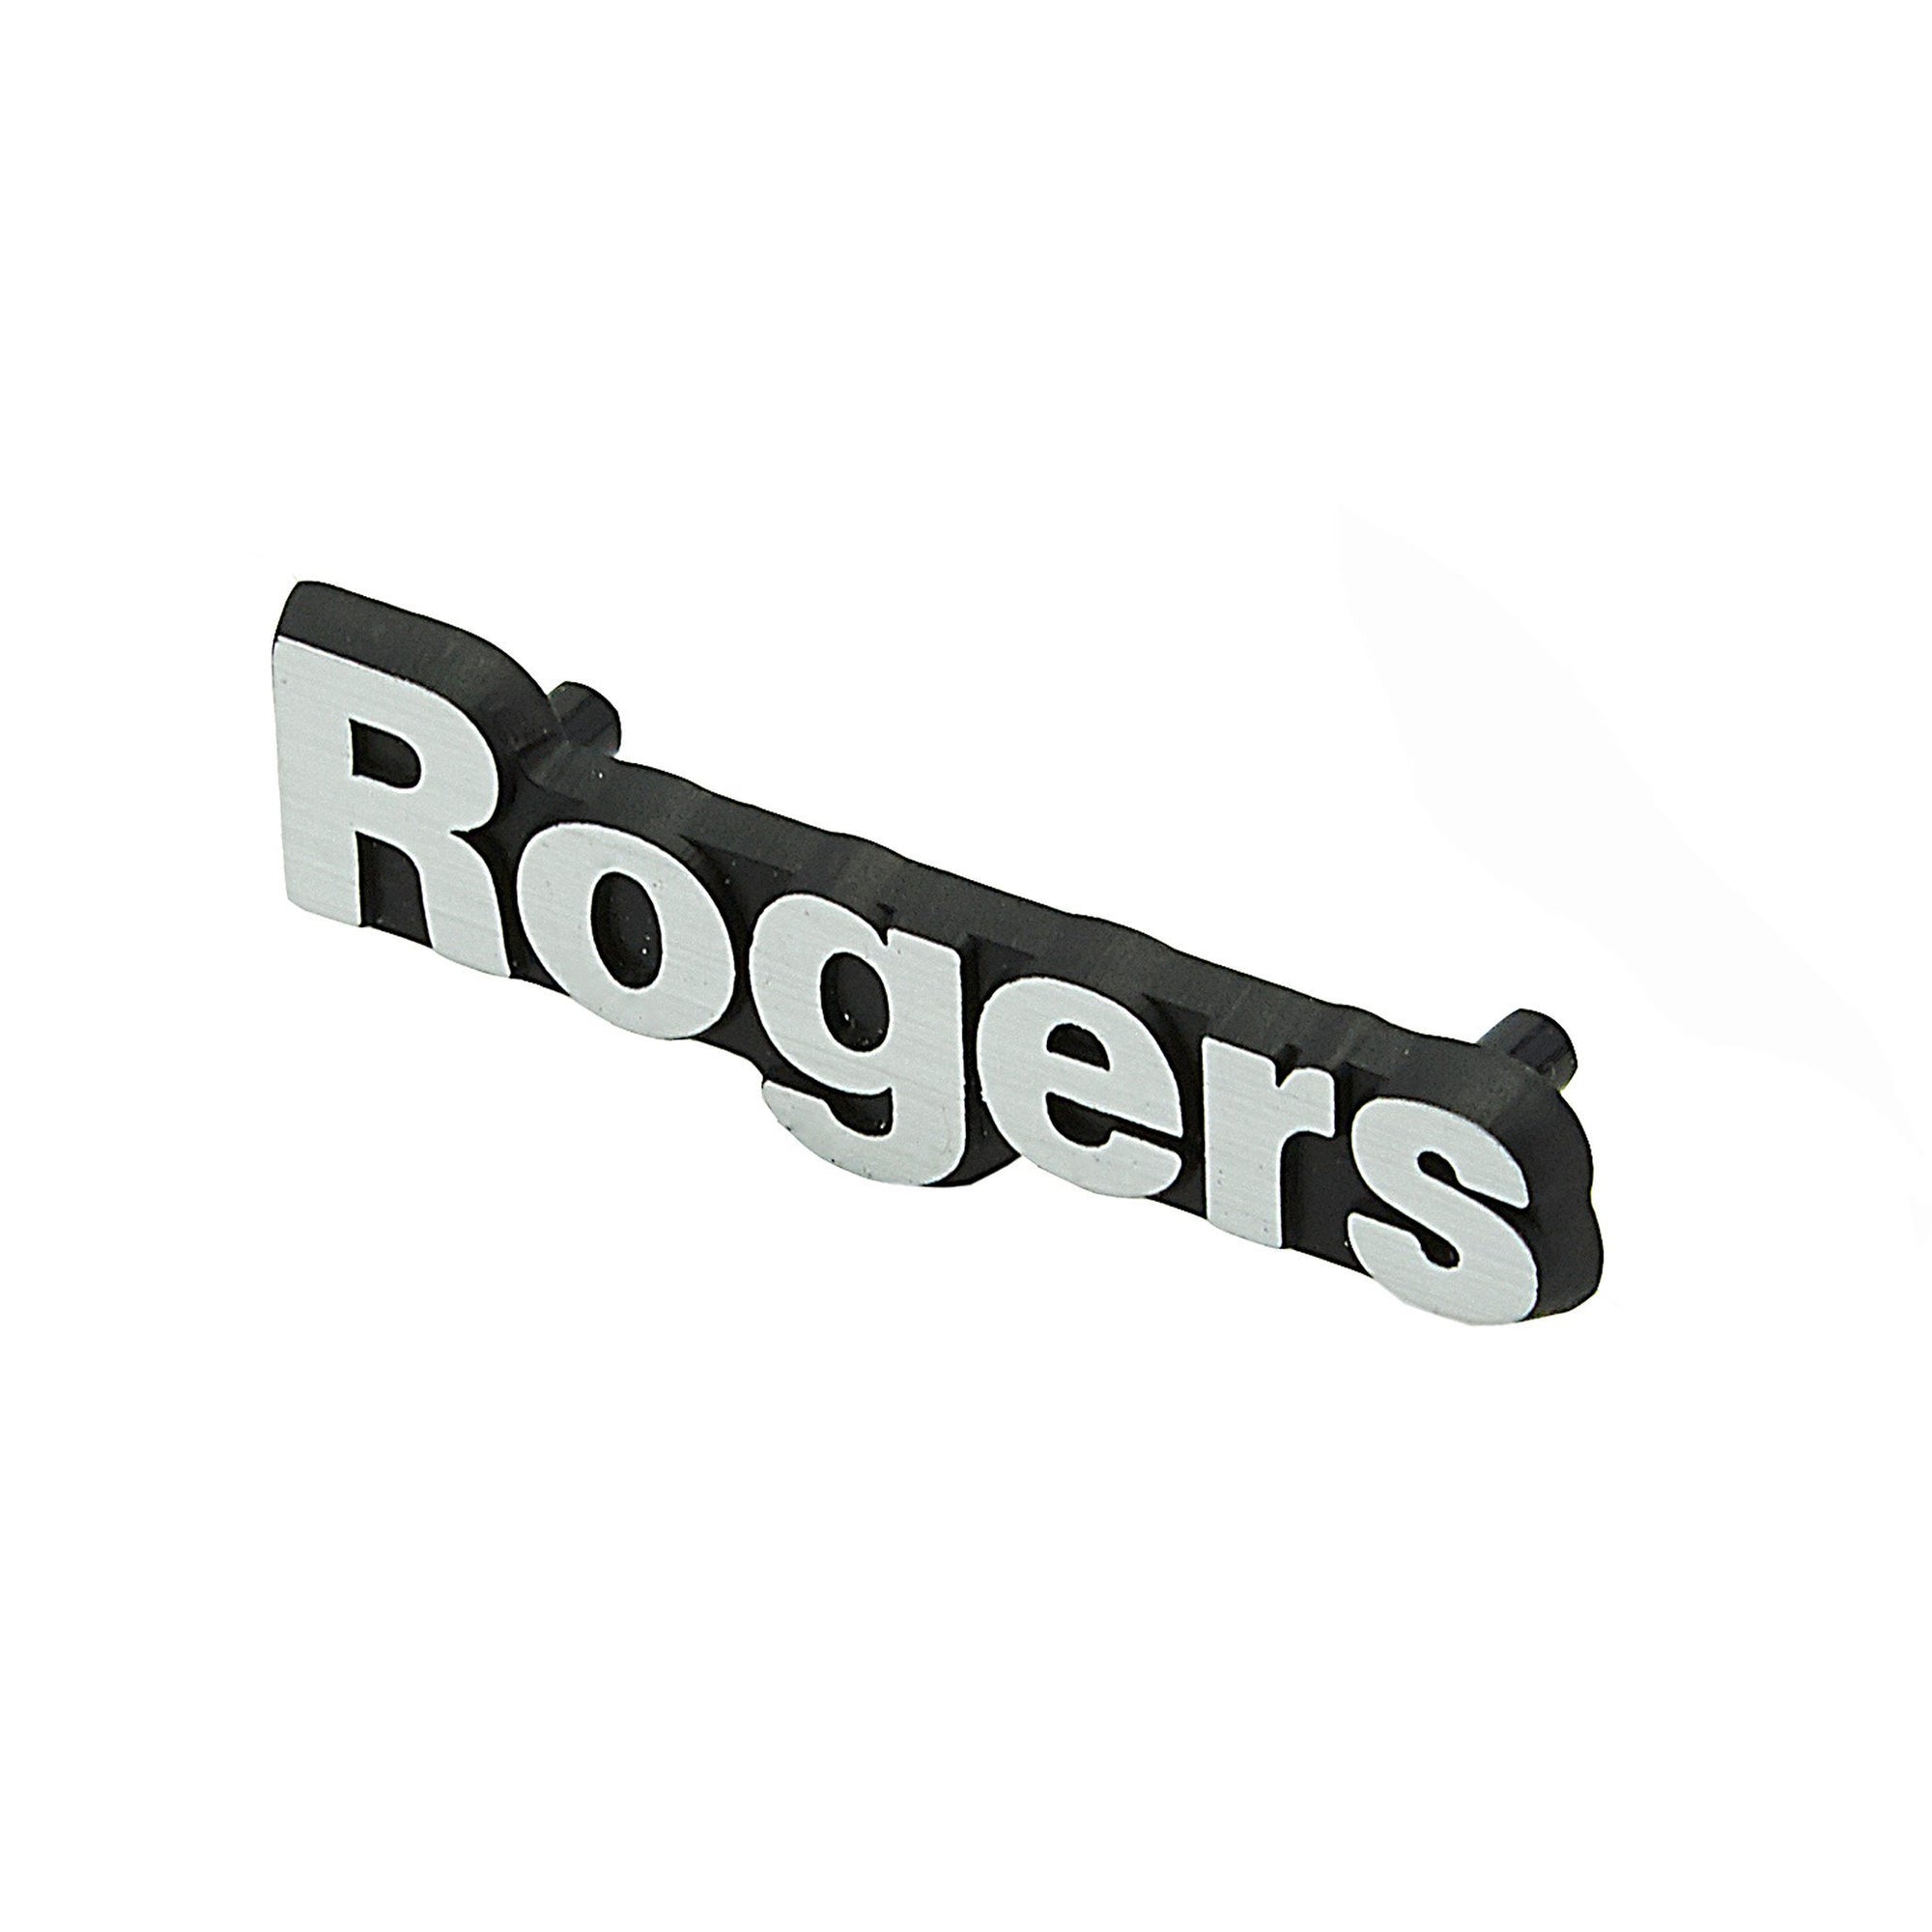 Rogers spares